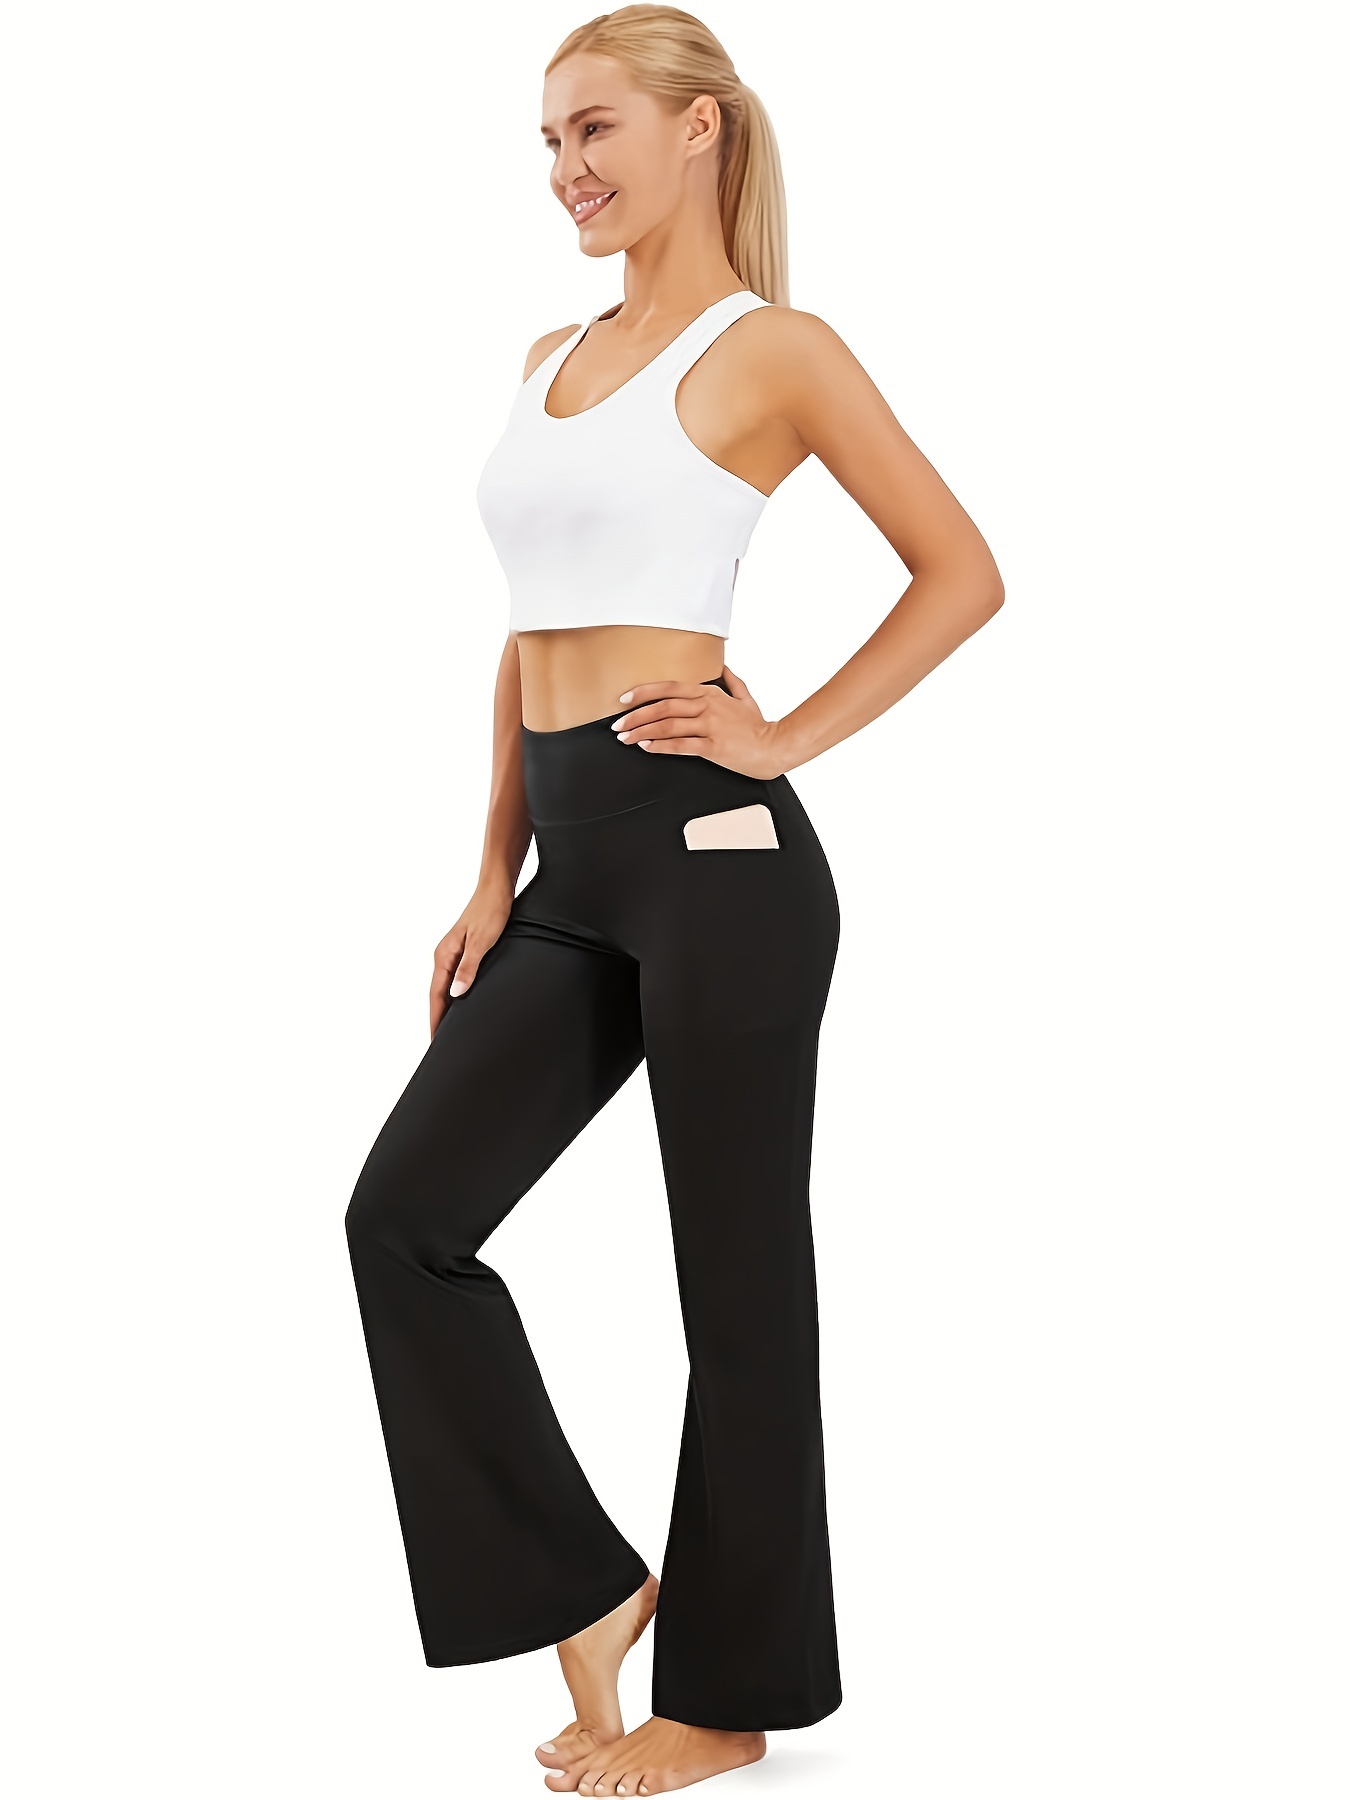 Bootcut Yoga Pants For Women Flare Leggings Gym Workout Pants With